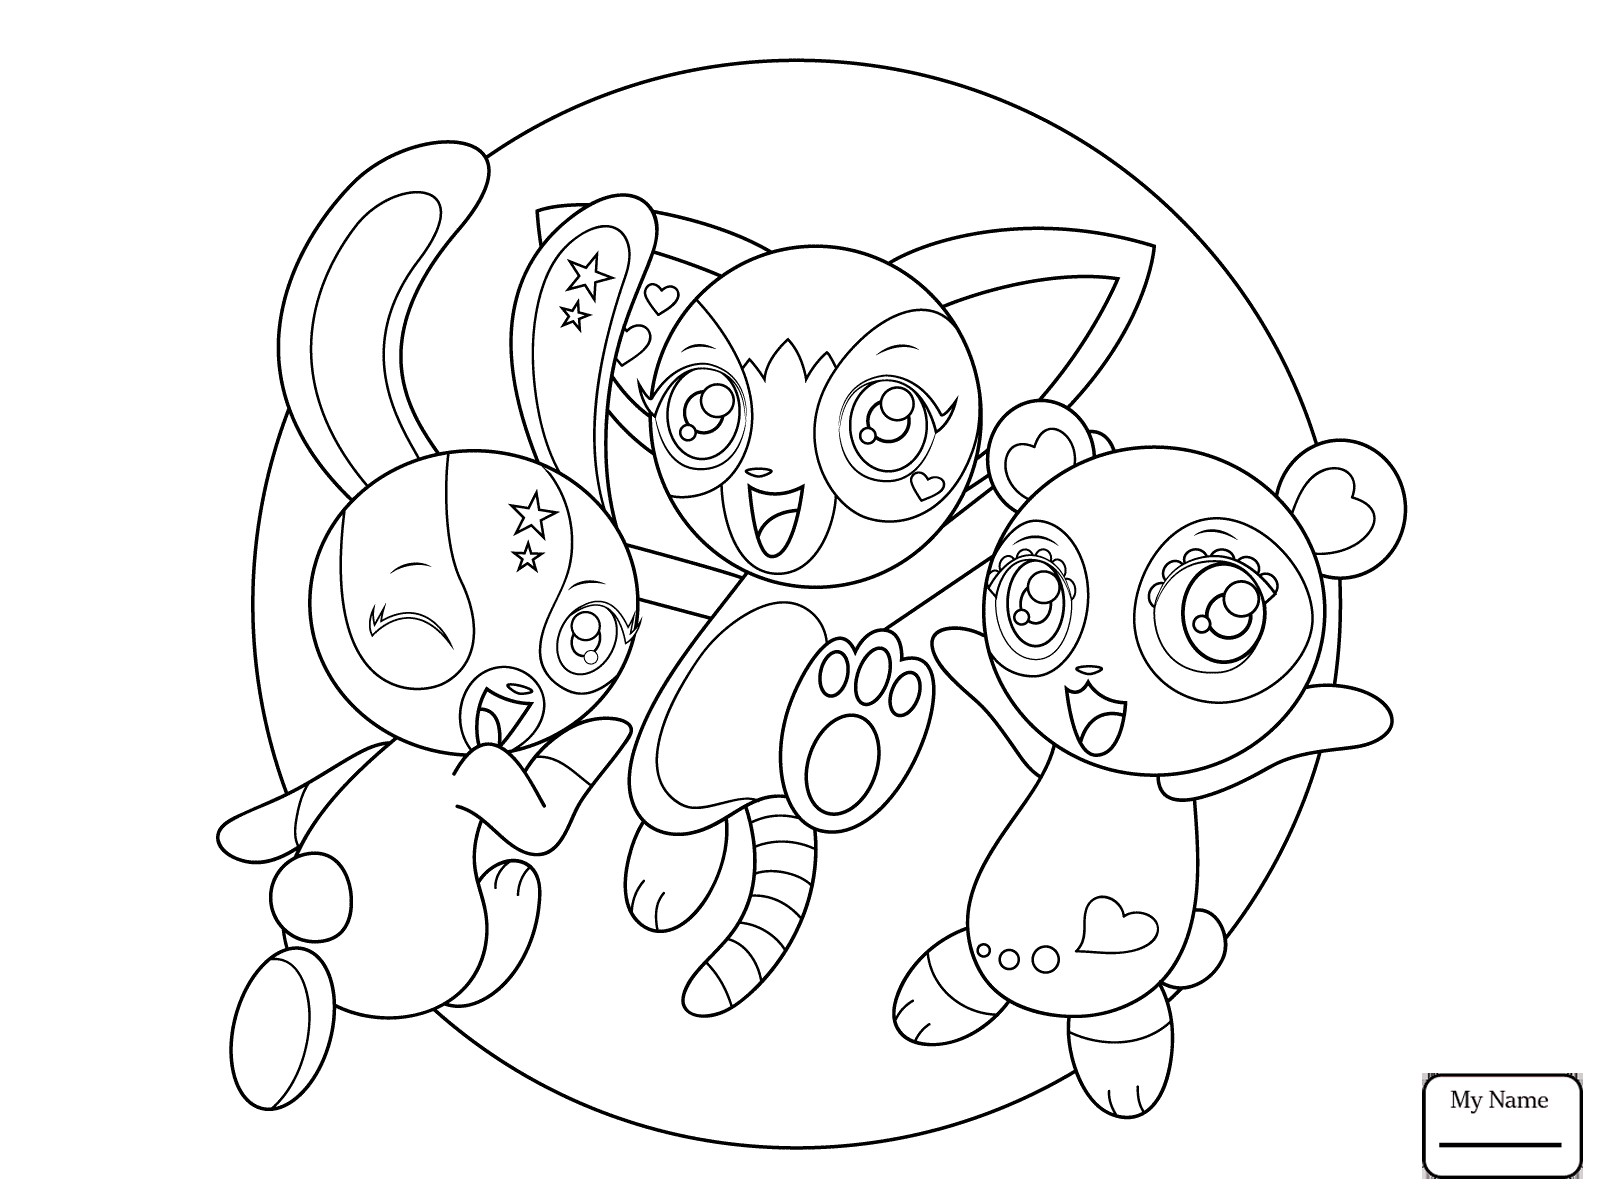 Furby Coloring Pages at GetDrawings.com | Free for personal ...